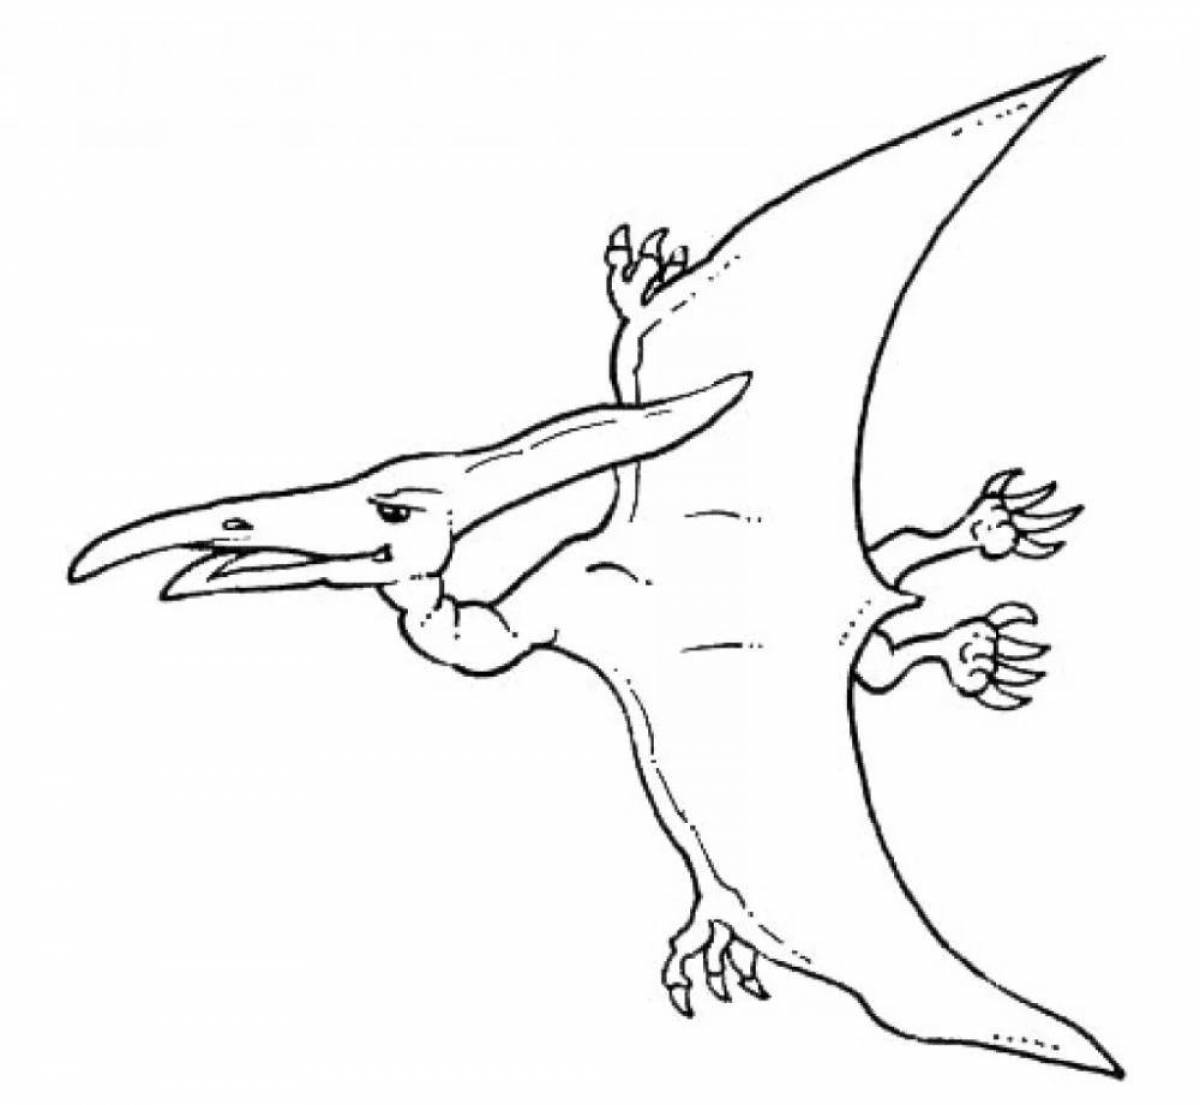 Adorable flying dinosaur coloring page